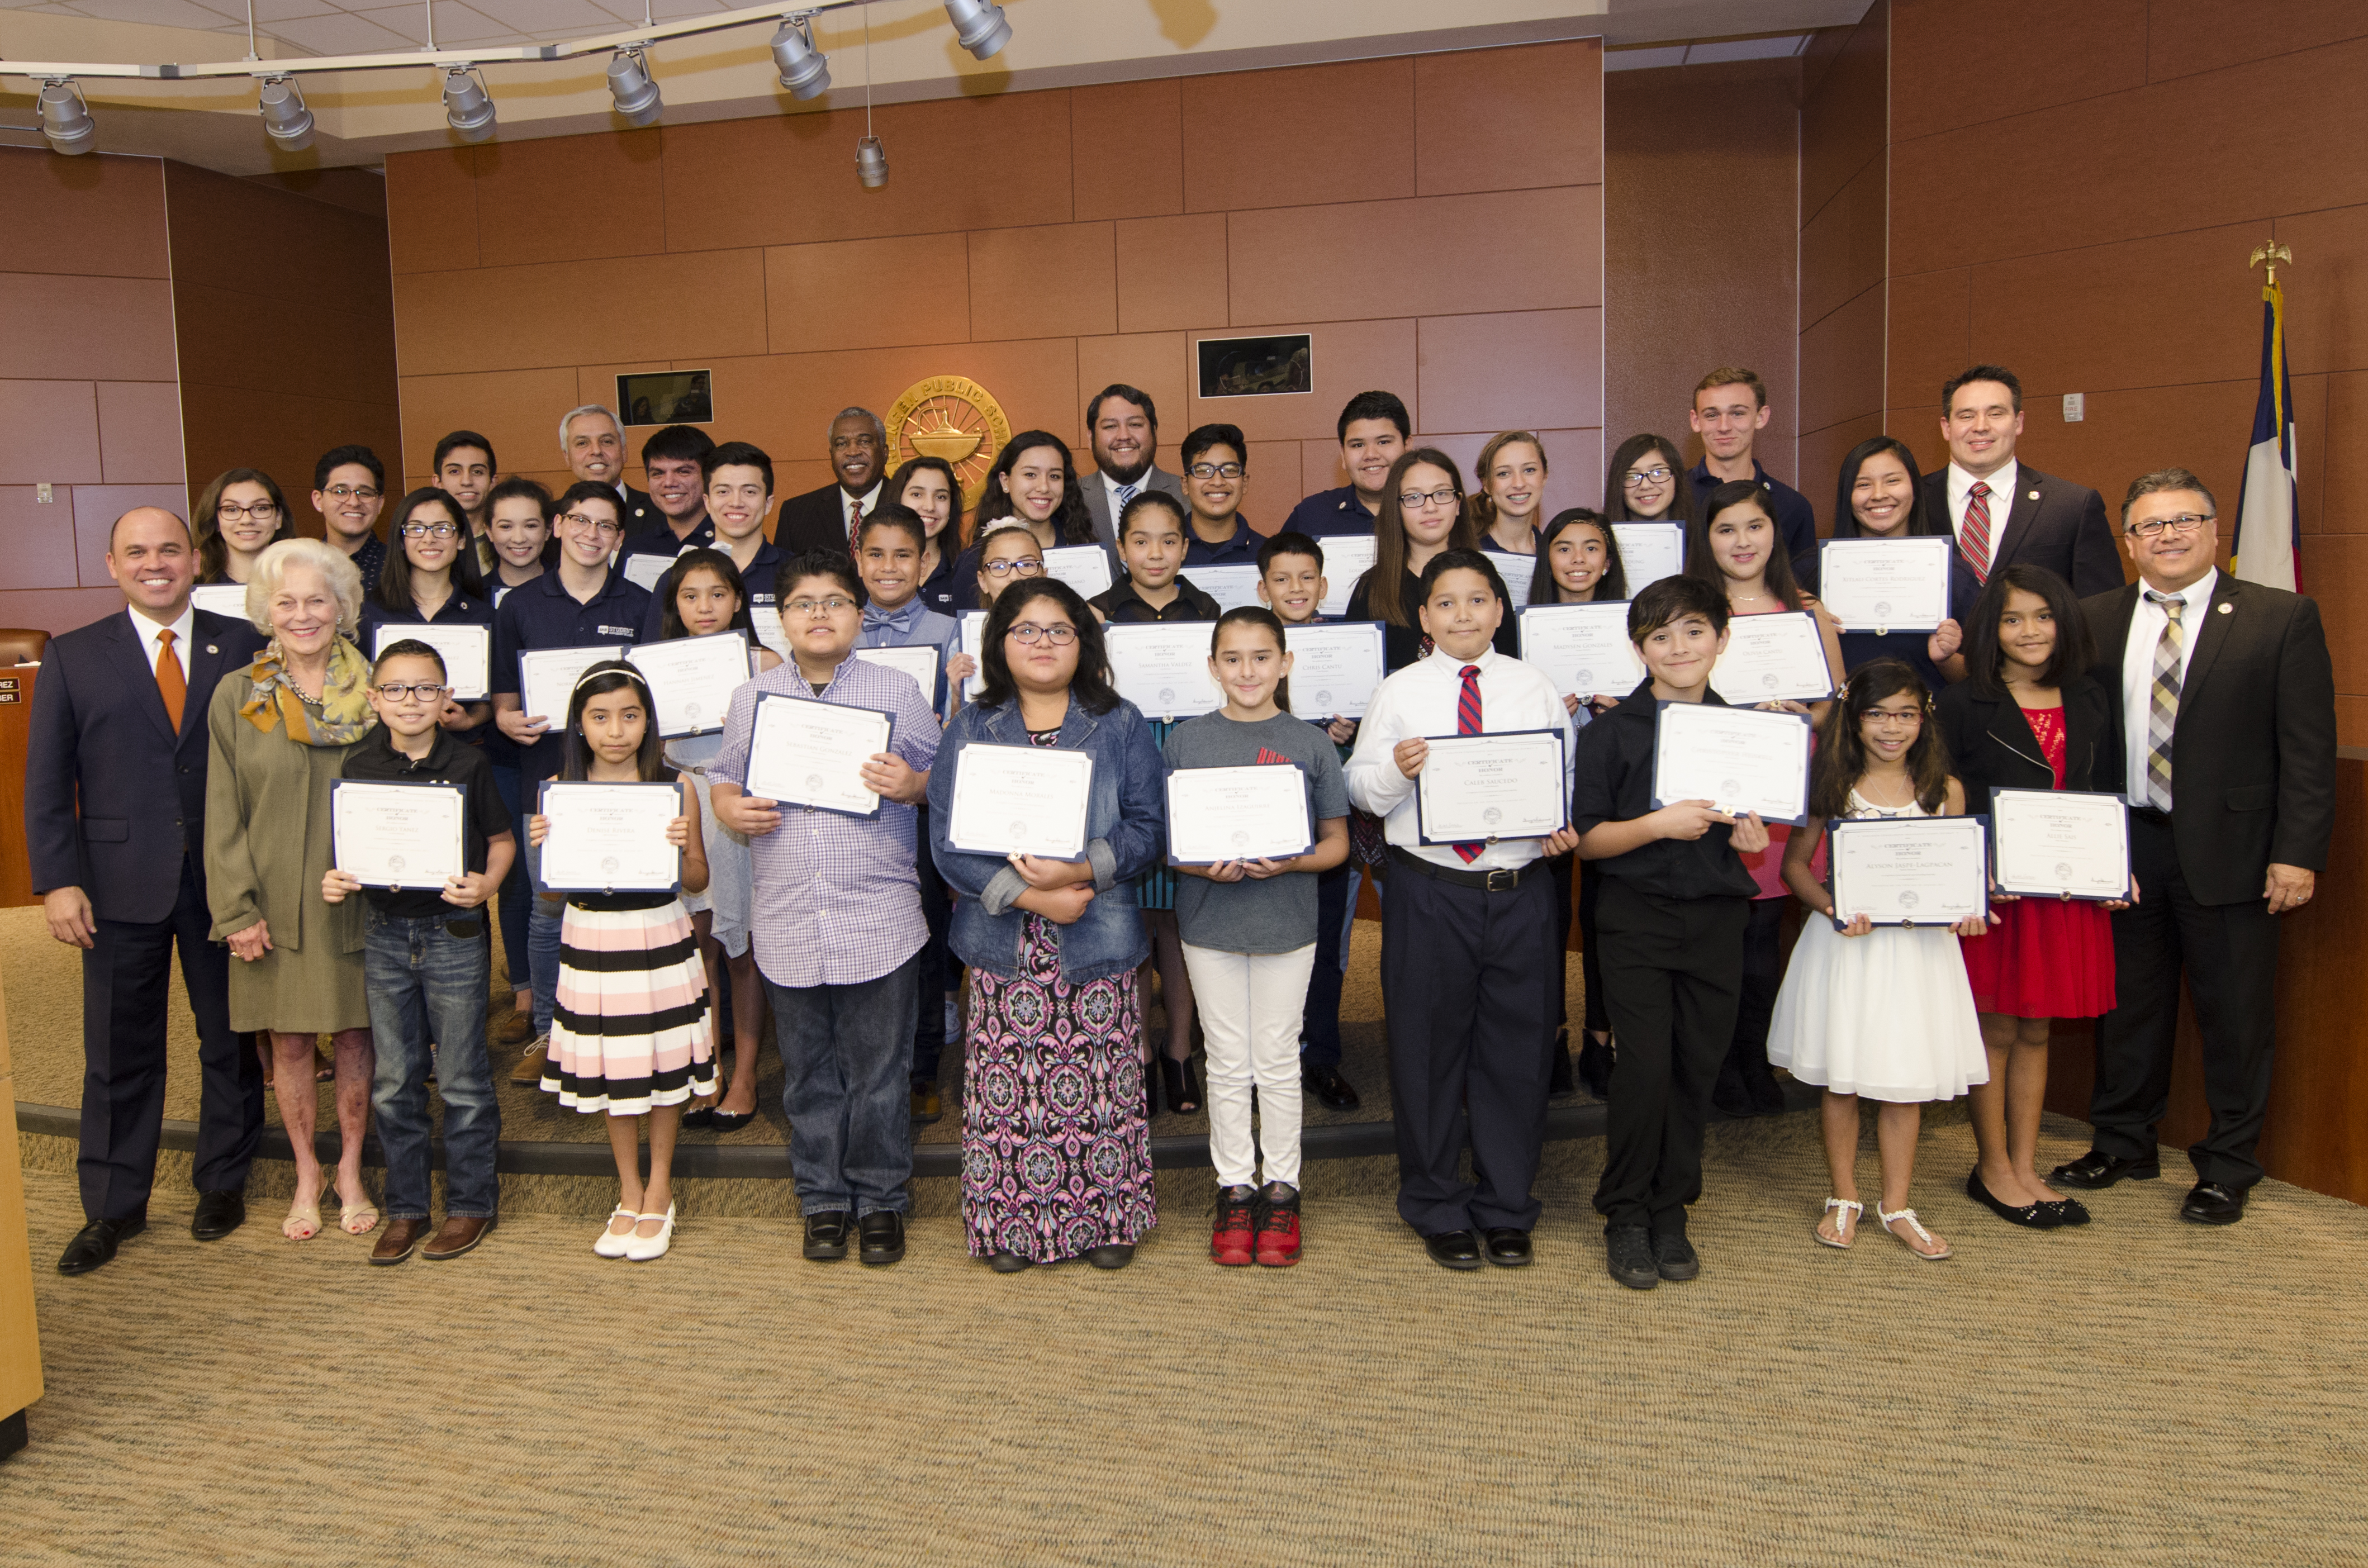 Student Leaders Recognized at January Board Meeting